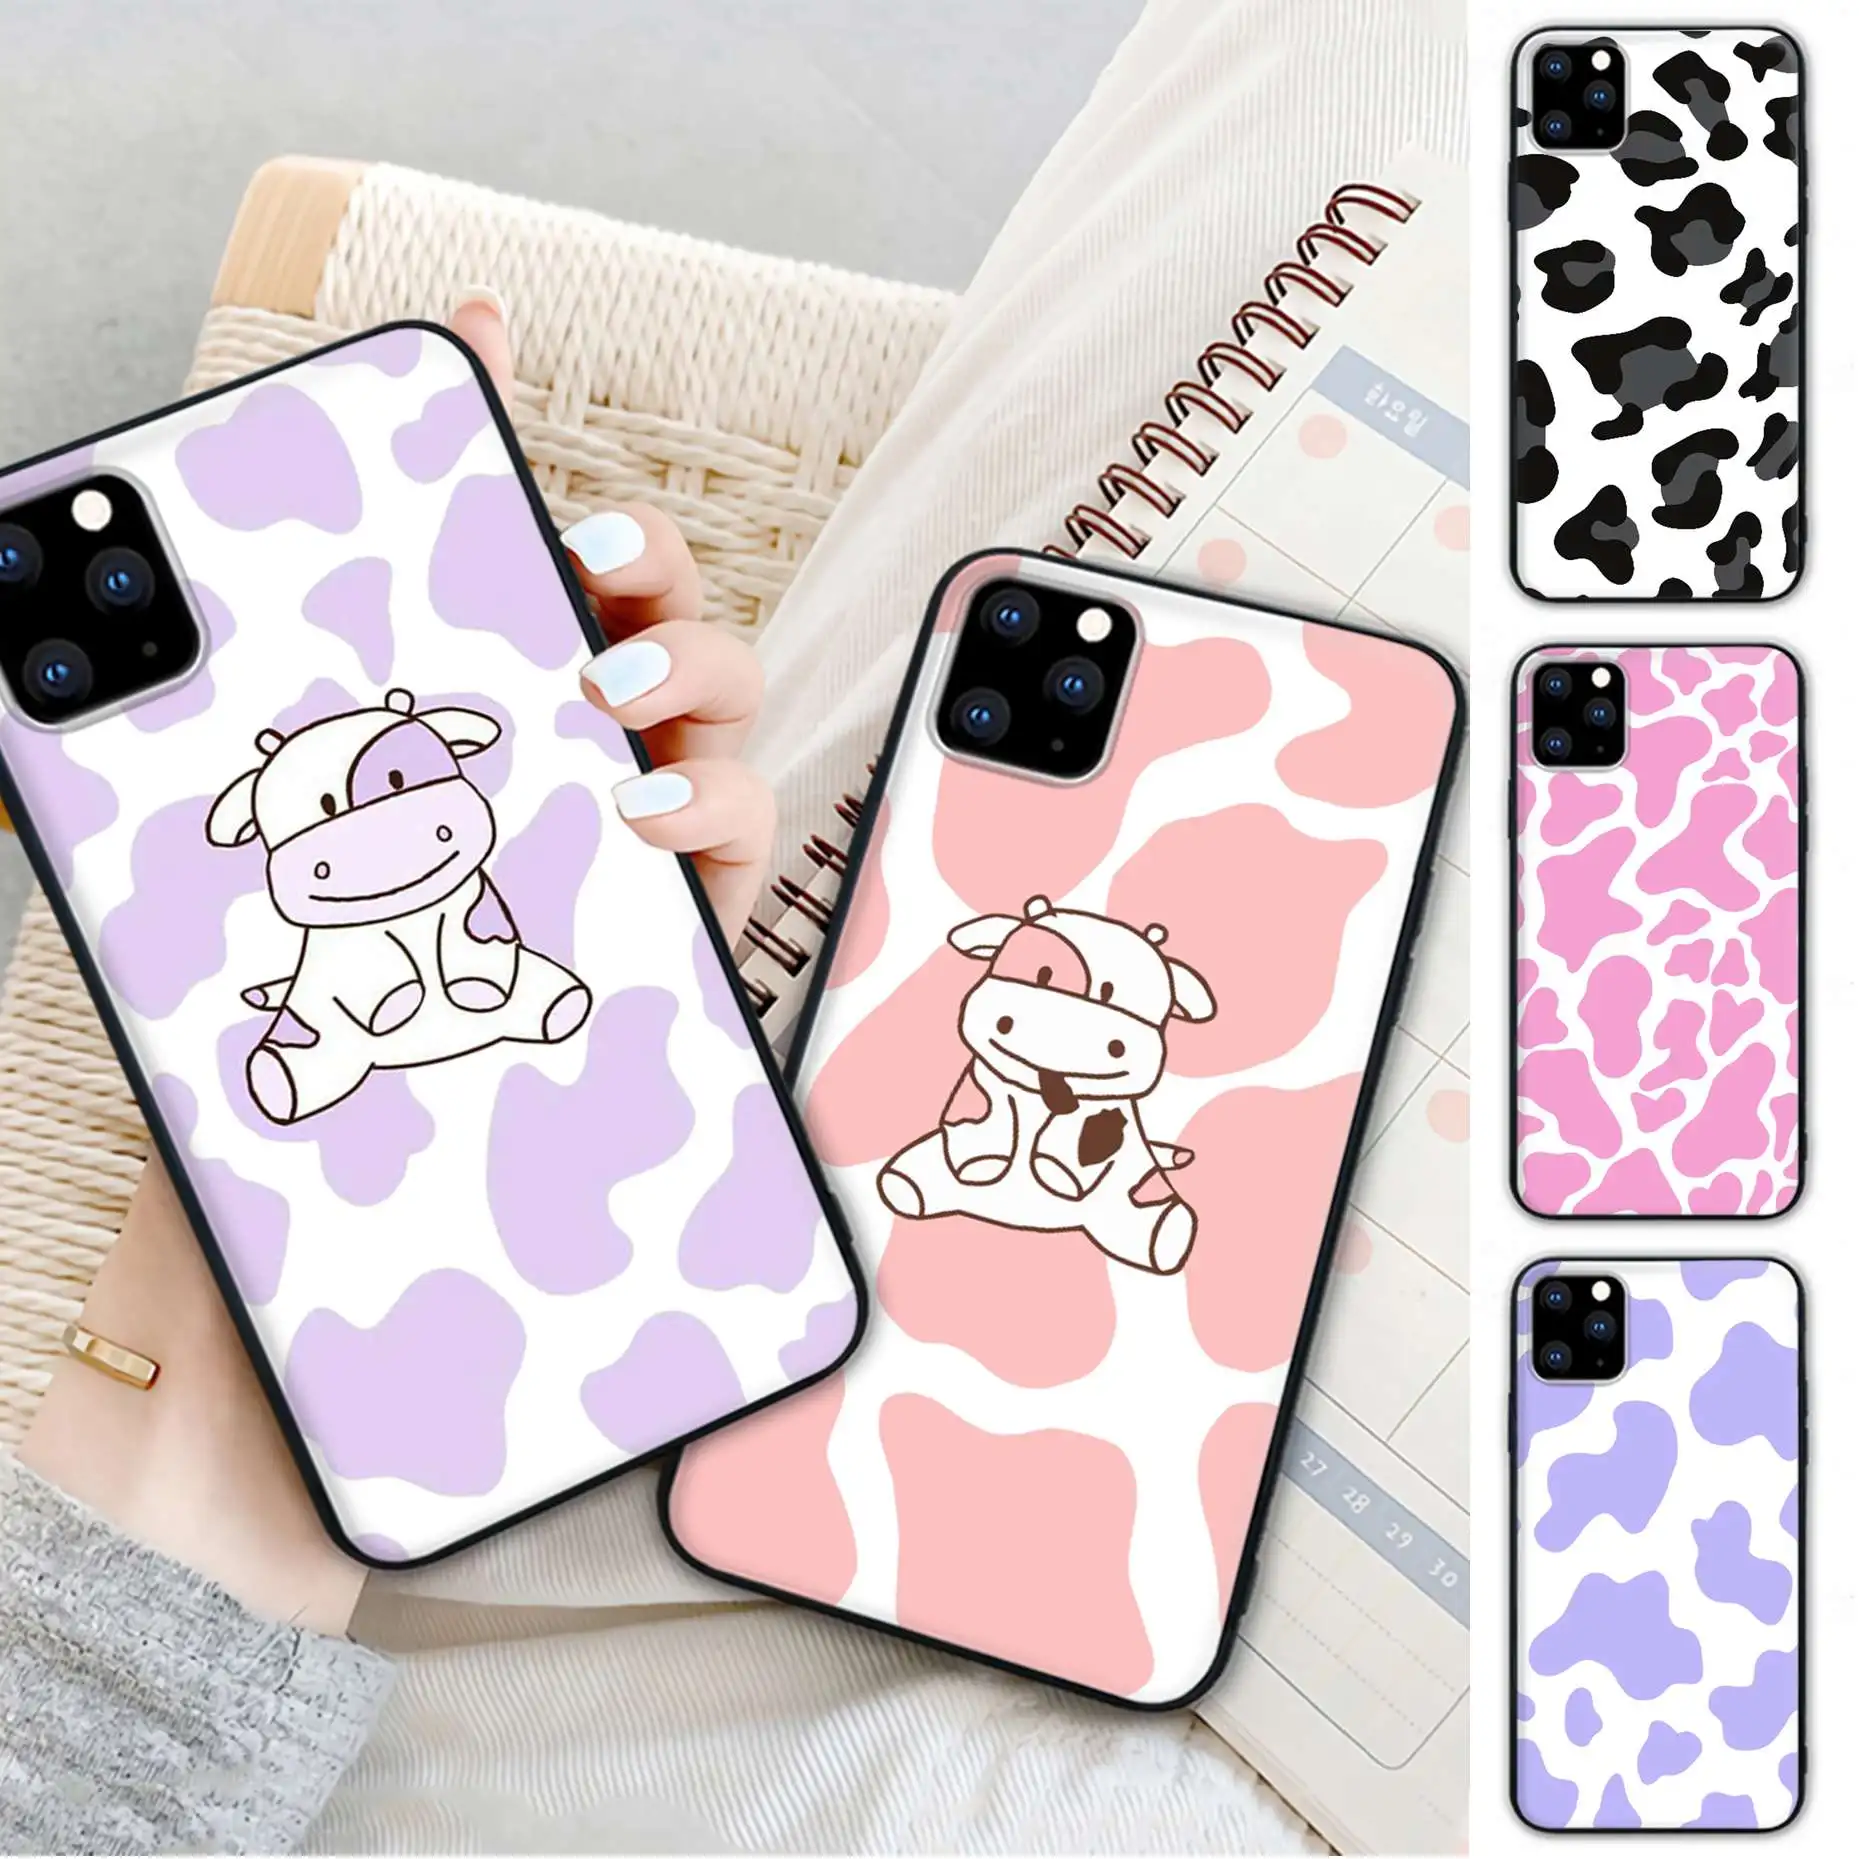 

Vintage Cute And Colorful Little Cow Mobile Phone Case For Samsung Galaxy M30S A01 A21 A31 A51 A71 A91 A10S A20S A30S A50S Cover